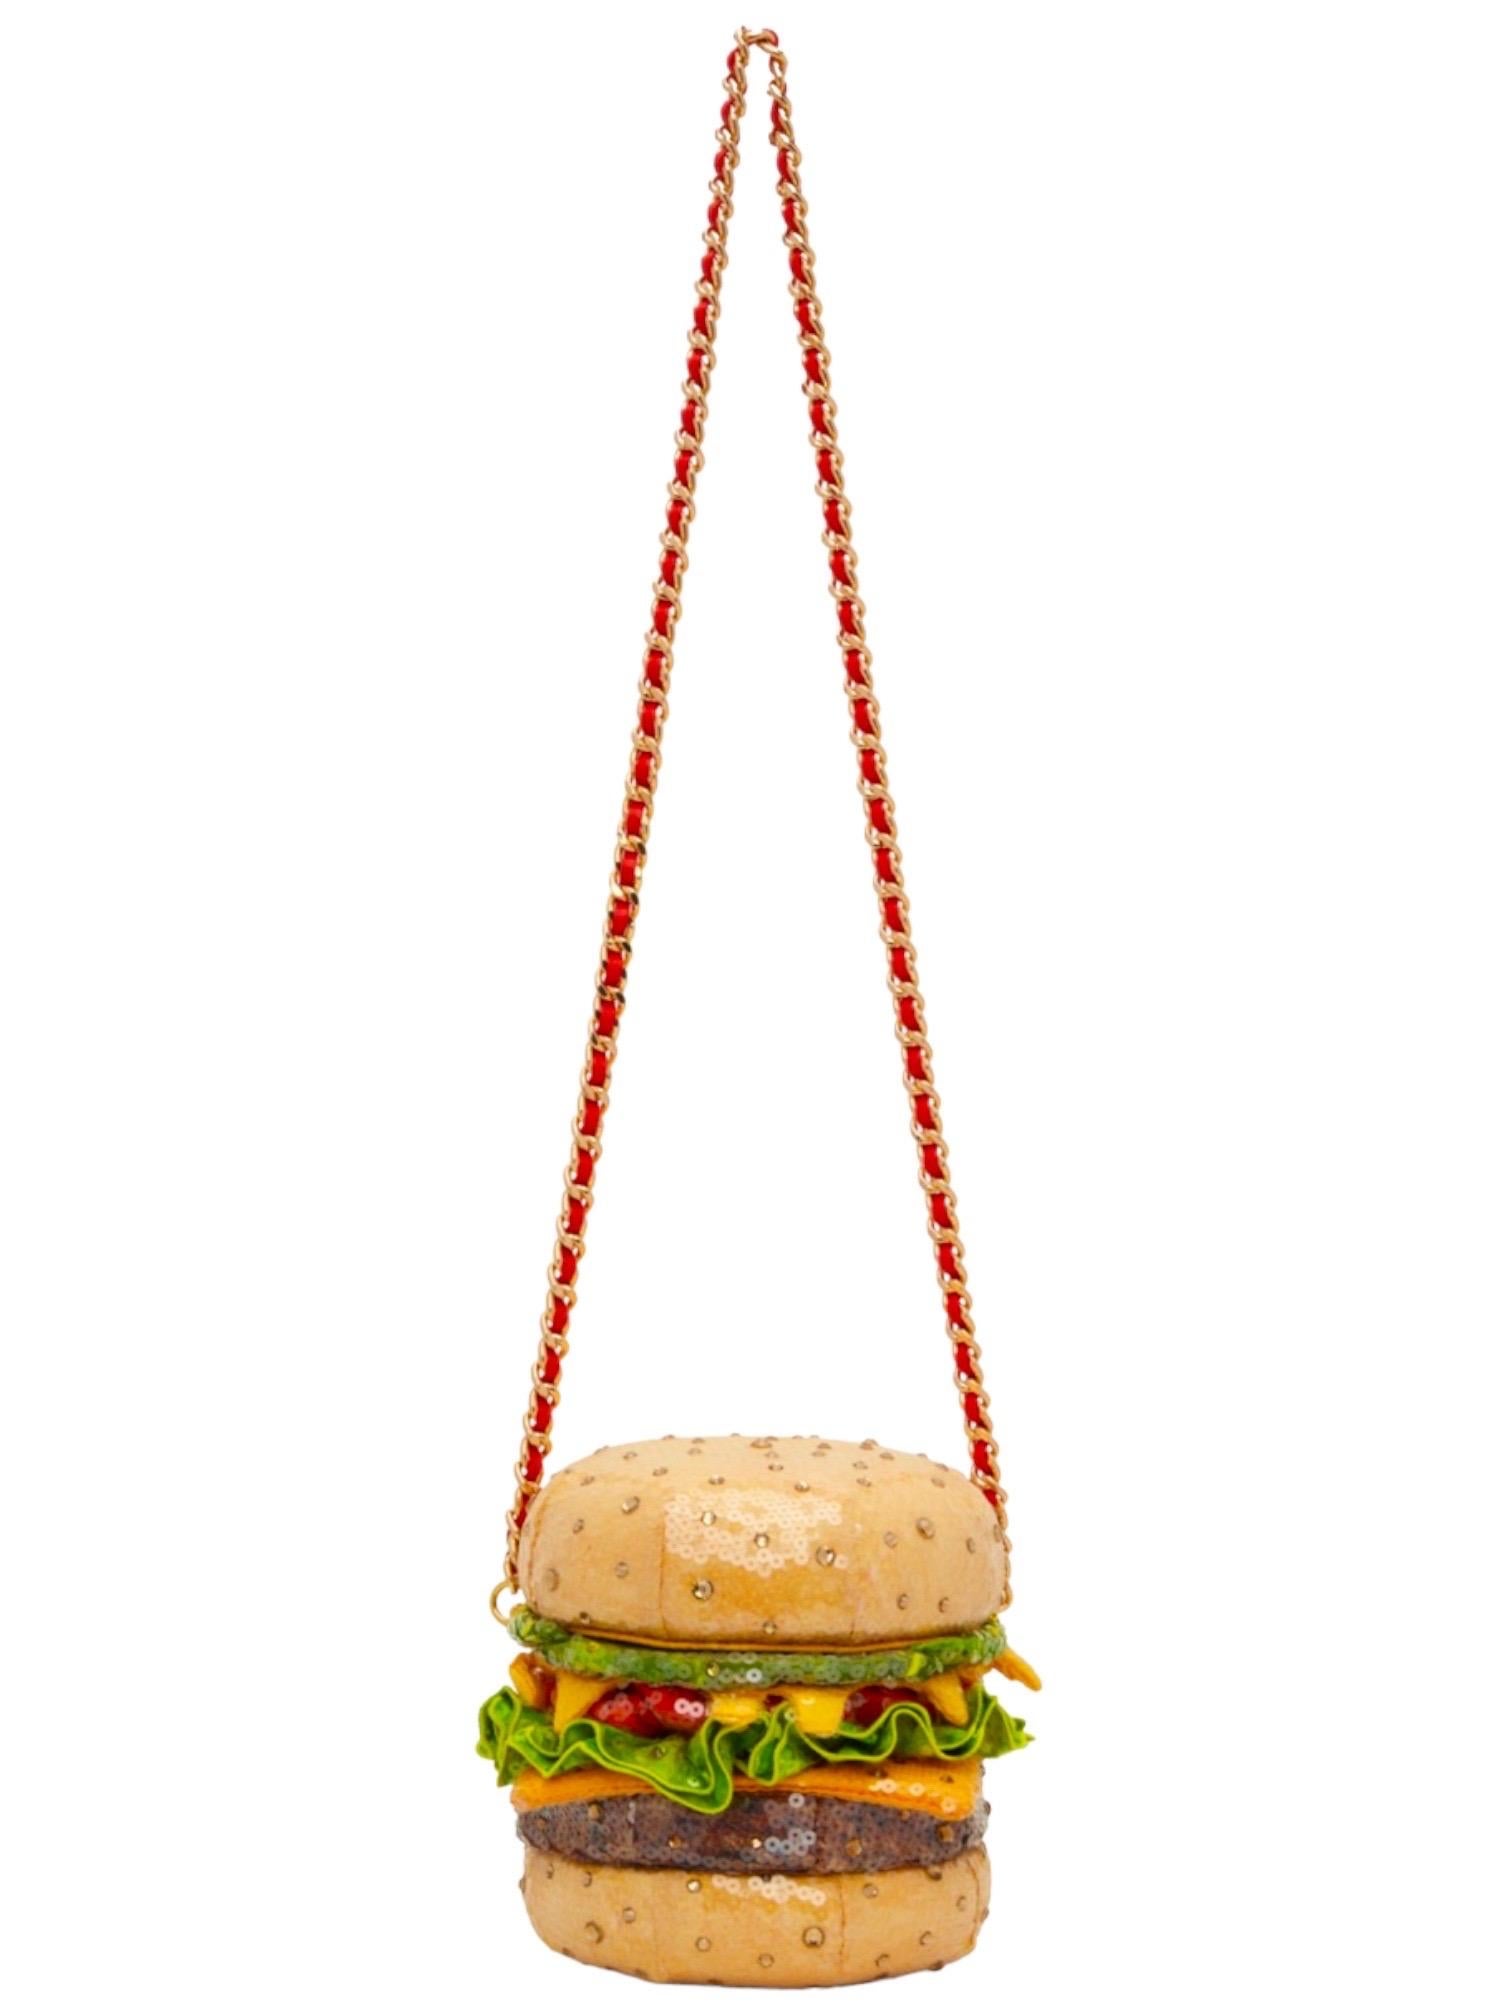 Structural rhinestone and sequin embellished multicolored shoulder bag in the shape of a hamburger from Moschino.
Designed by Jeremy Scott
Detachable chain and leather shoulder strap 
Covered completely in sequin embellishment’s
Featuring